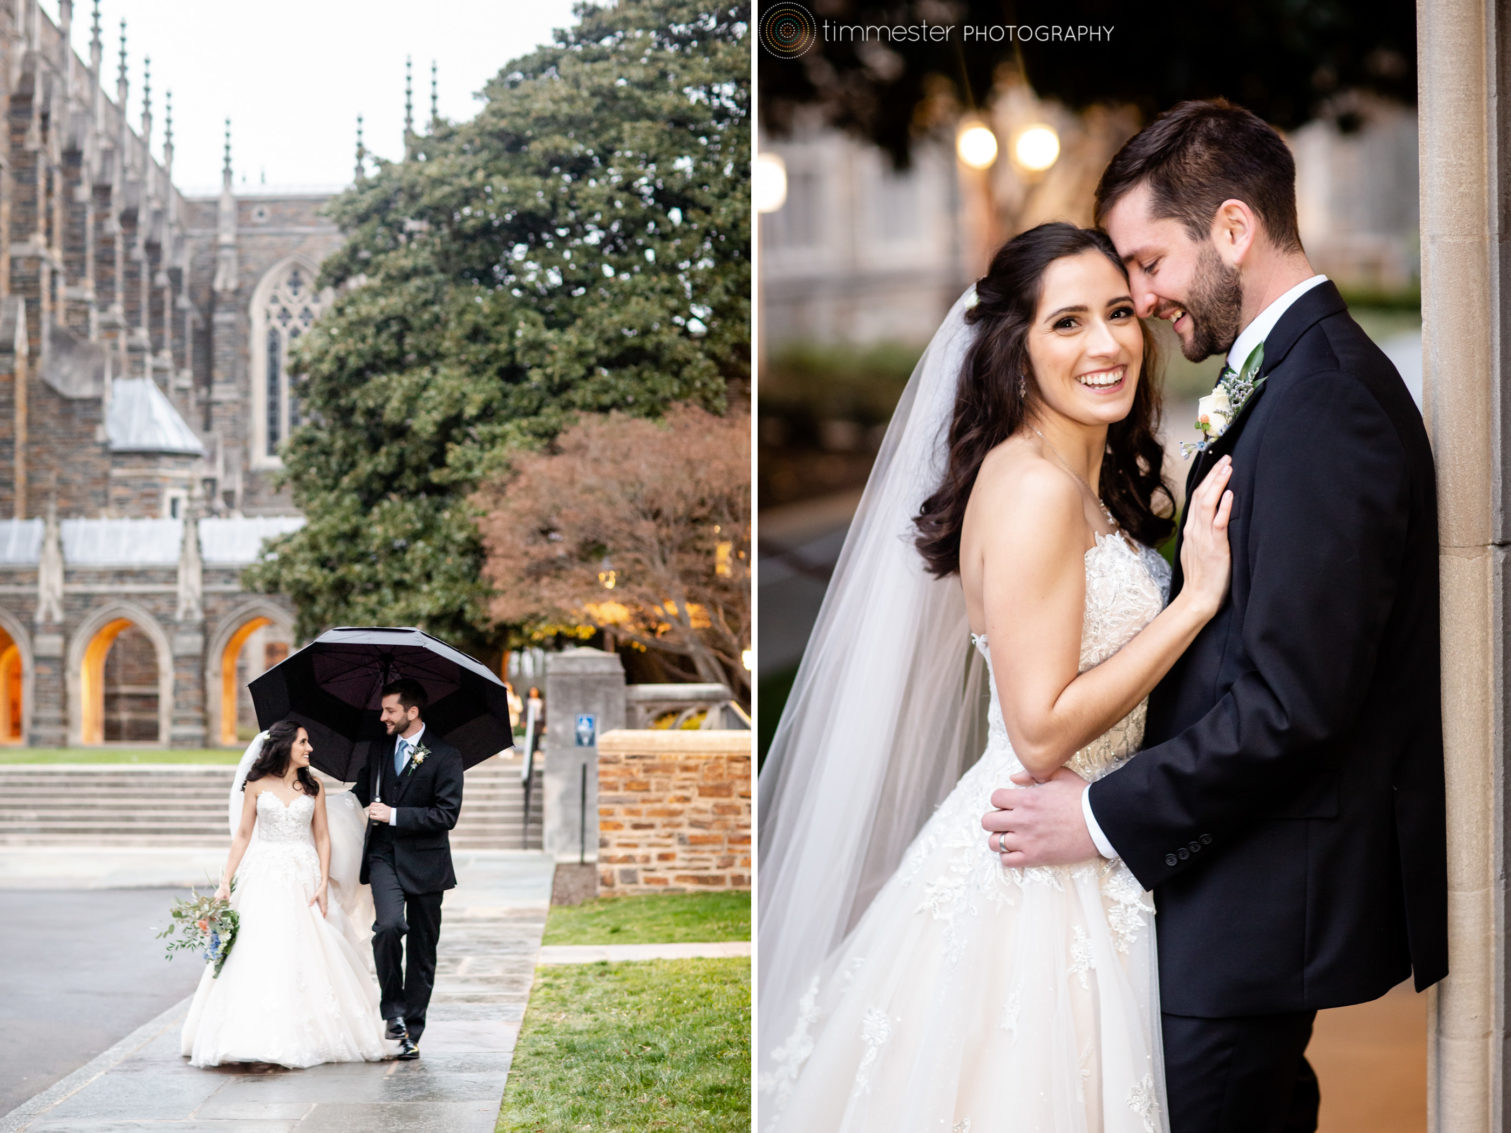 A Duke University wedding at the chapel and on the grounds in Durham, NC